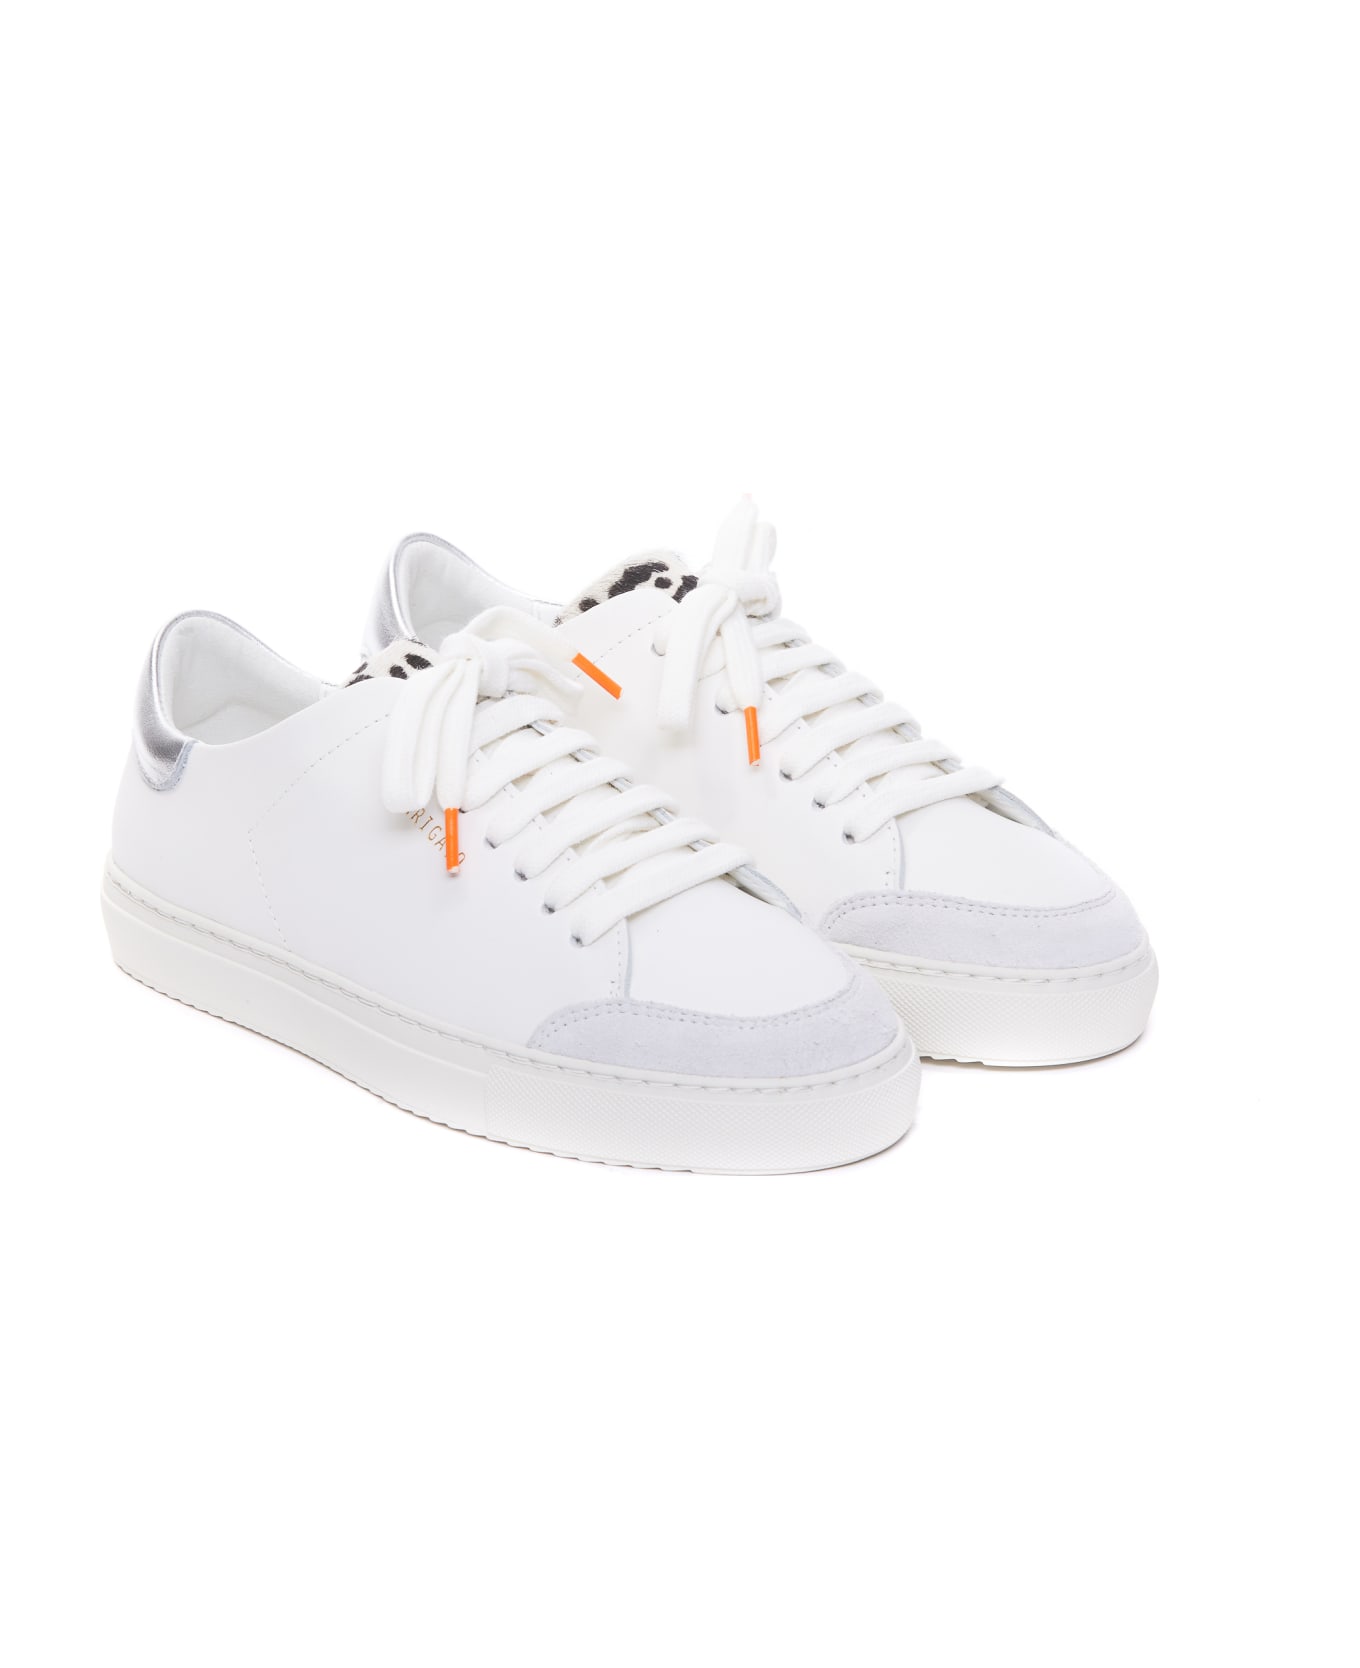 Axel Arigato Clean 91 Triple Sneakers - White Silver スニーカー